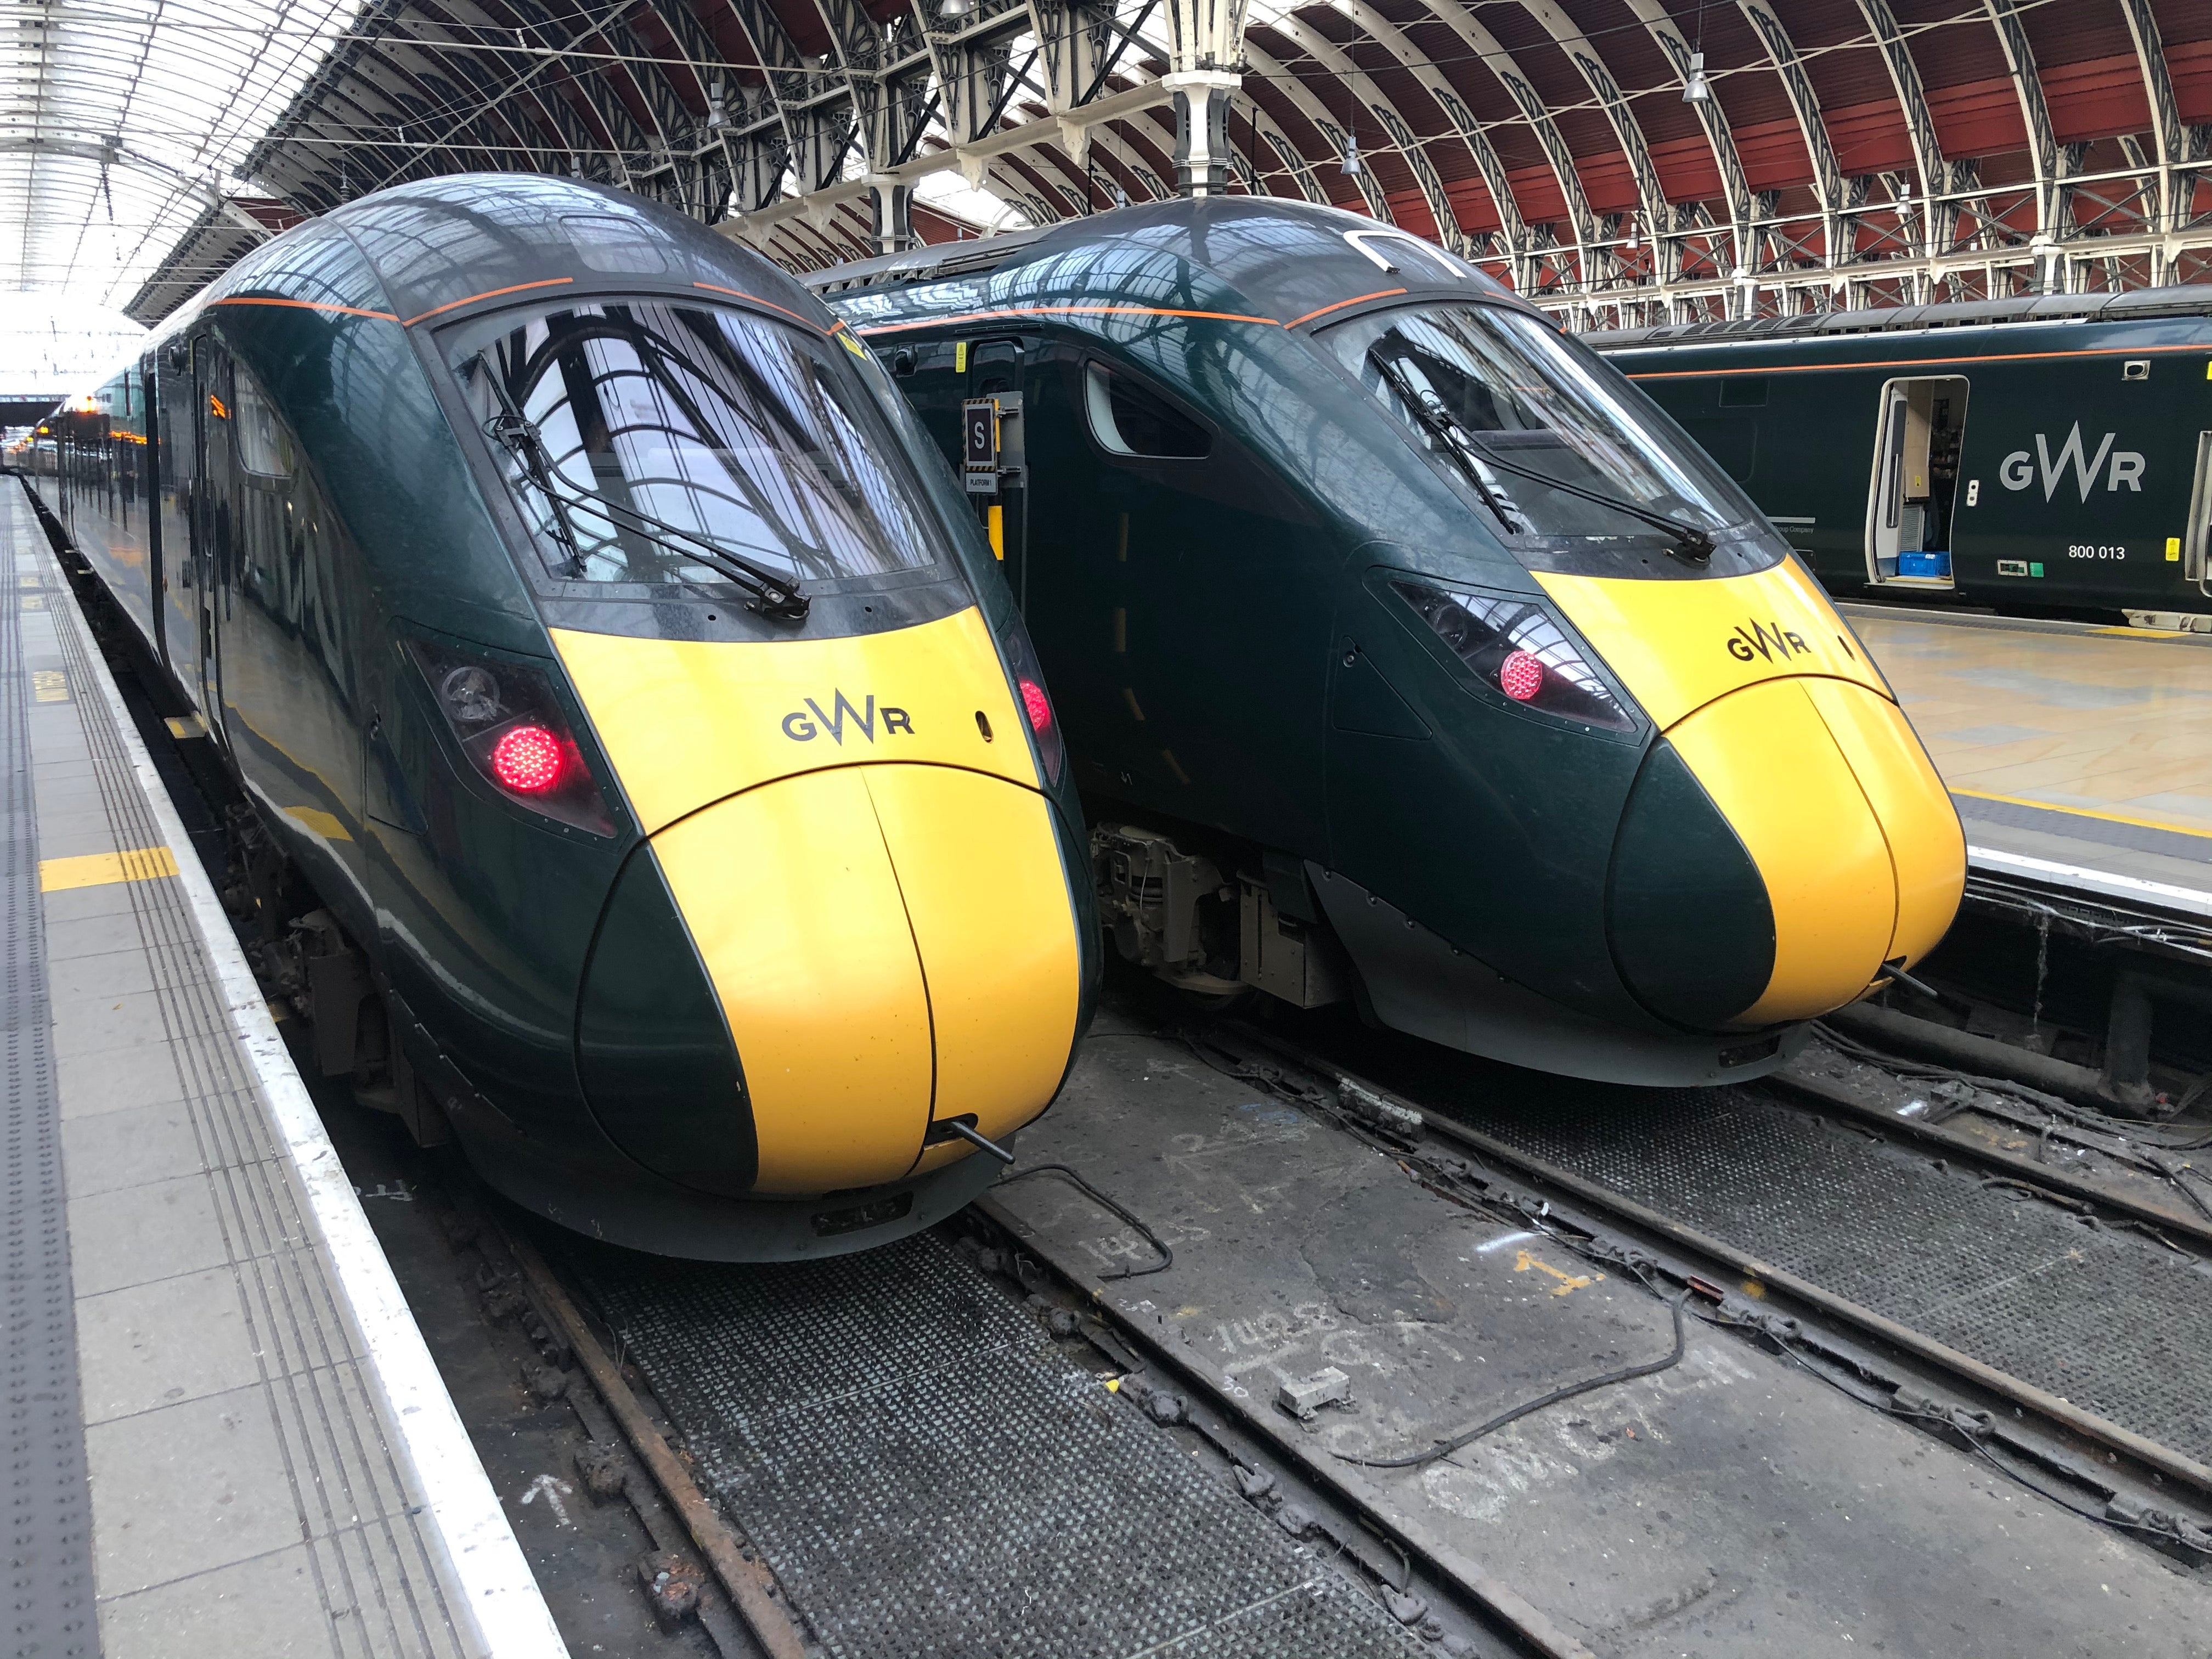 Stopping trains: all Great Western lines to and London Paddington are blocked